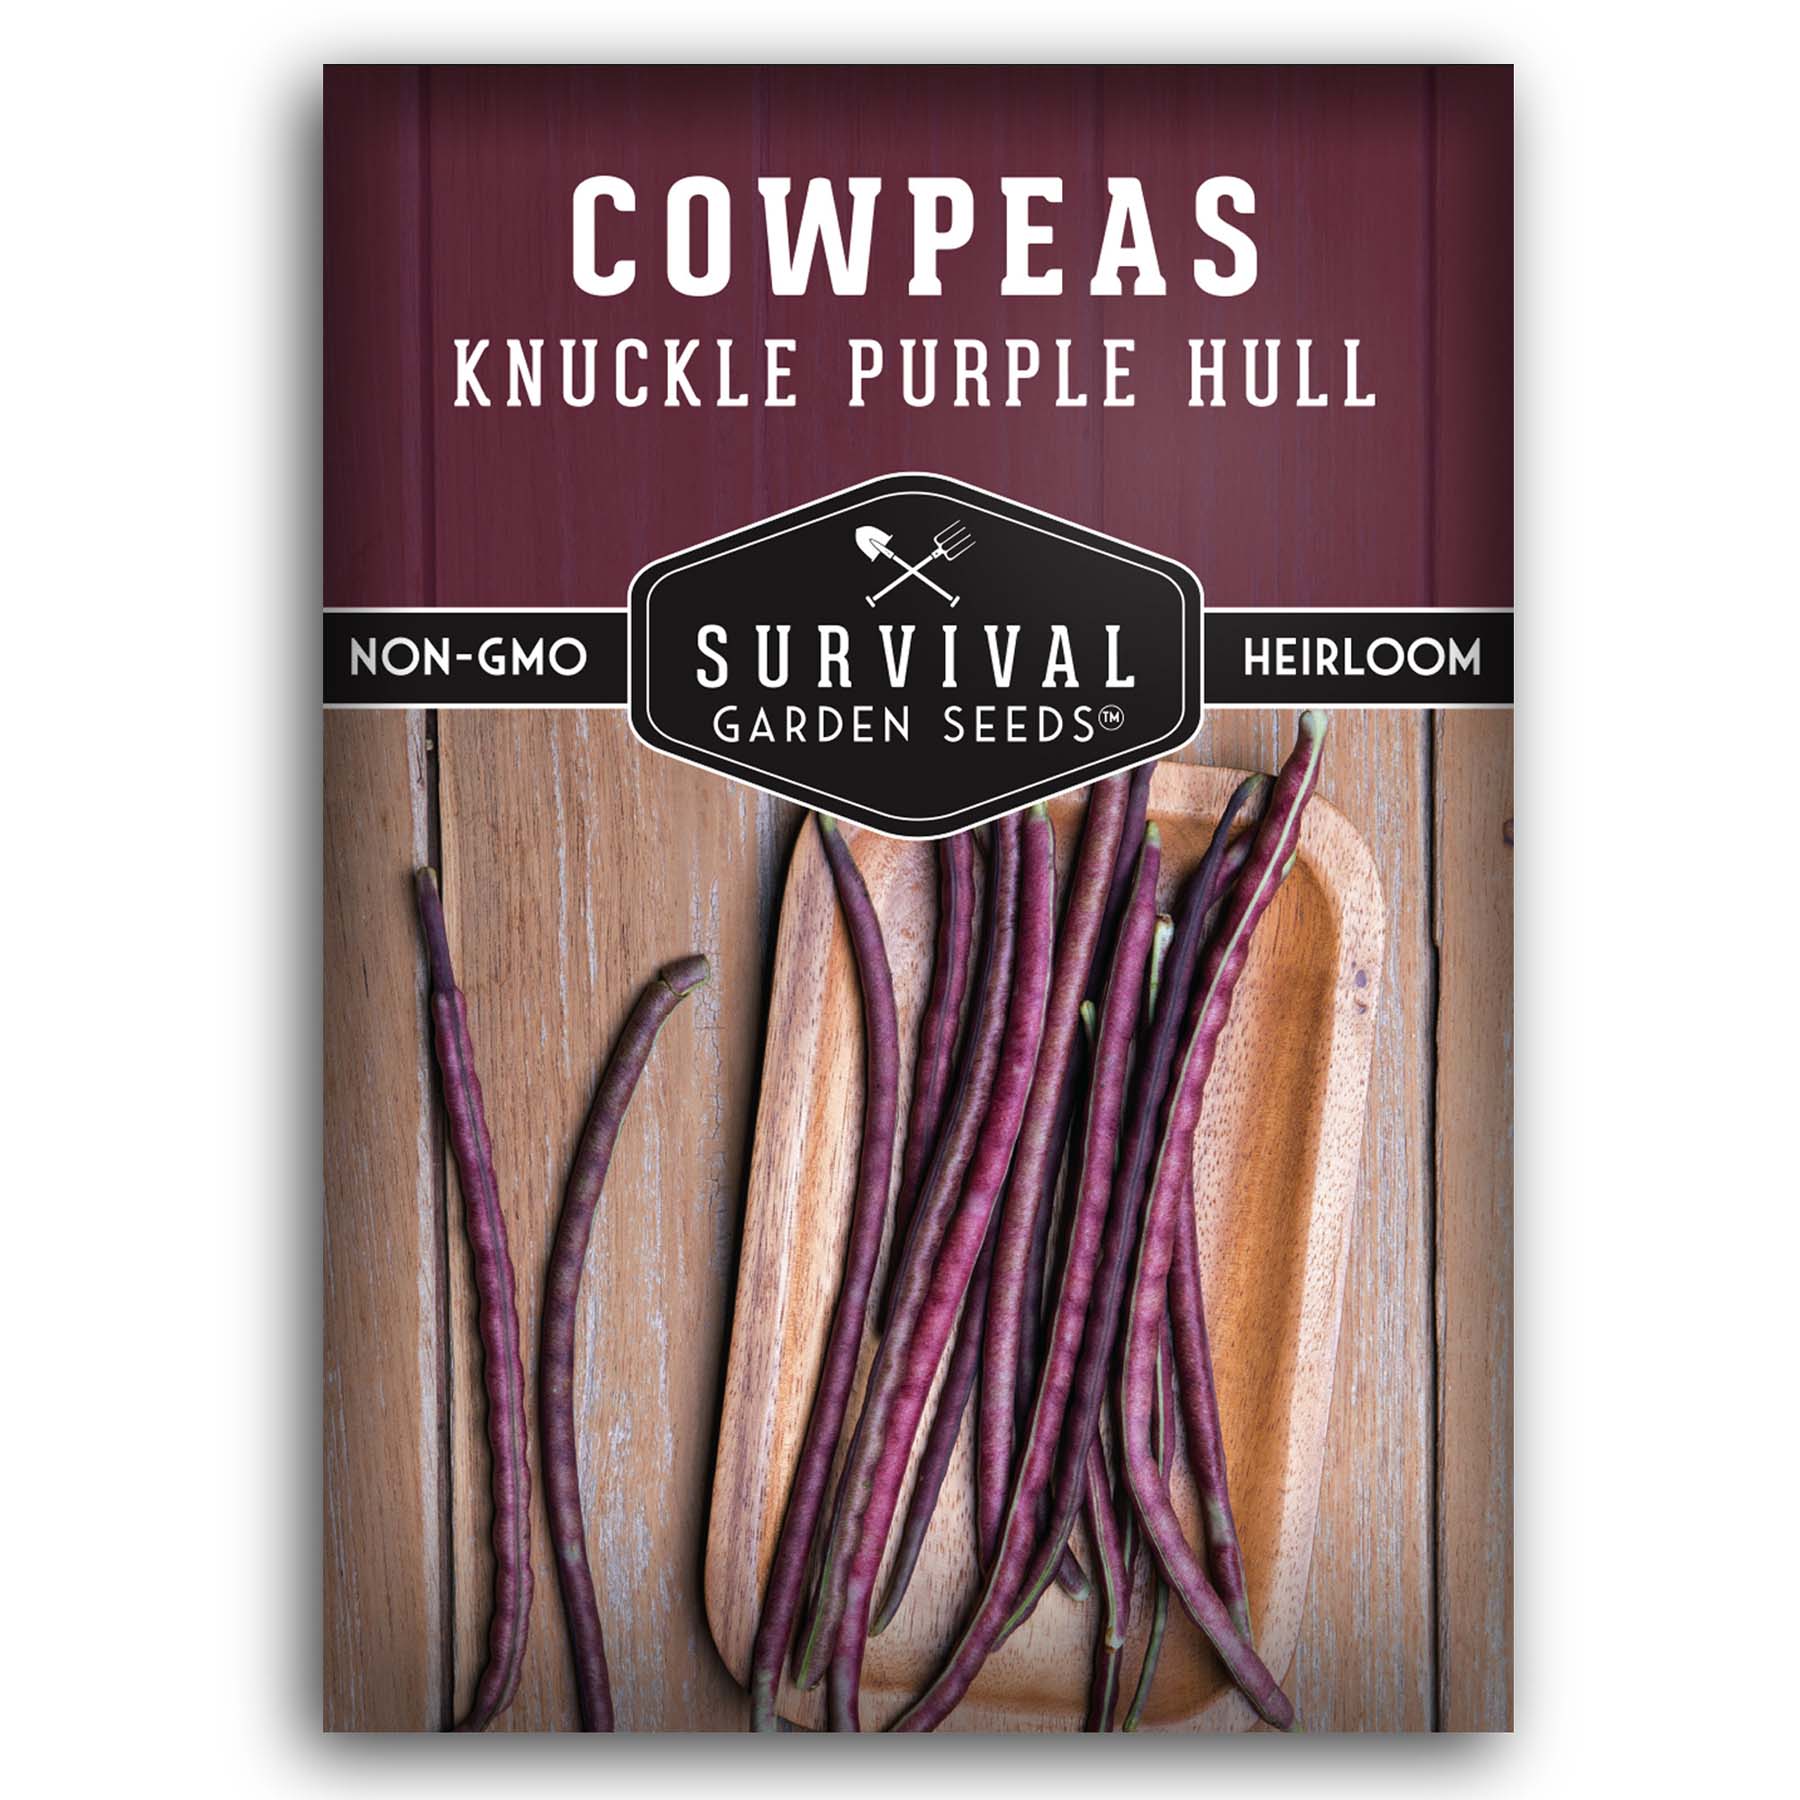 Knuckle Purple Hull Cowpeas seeds for planting